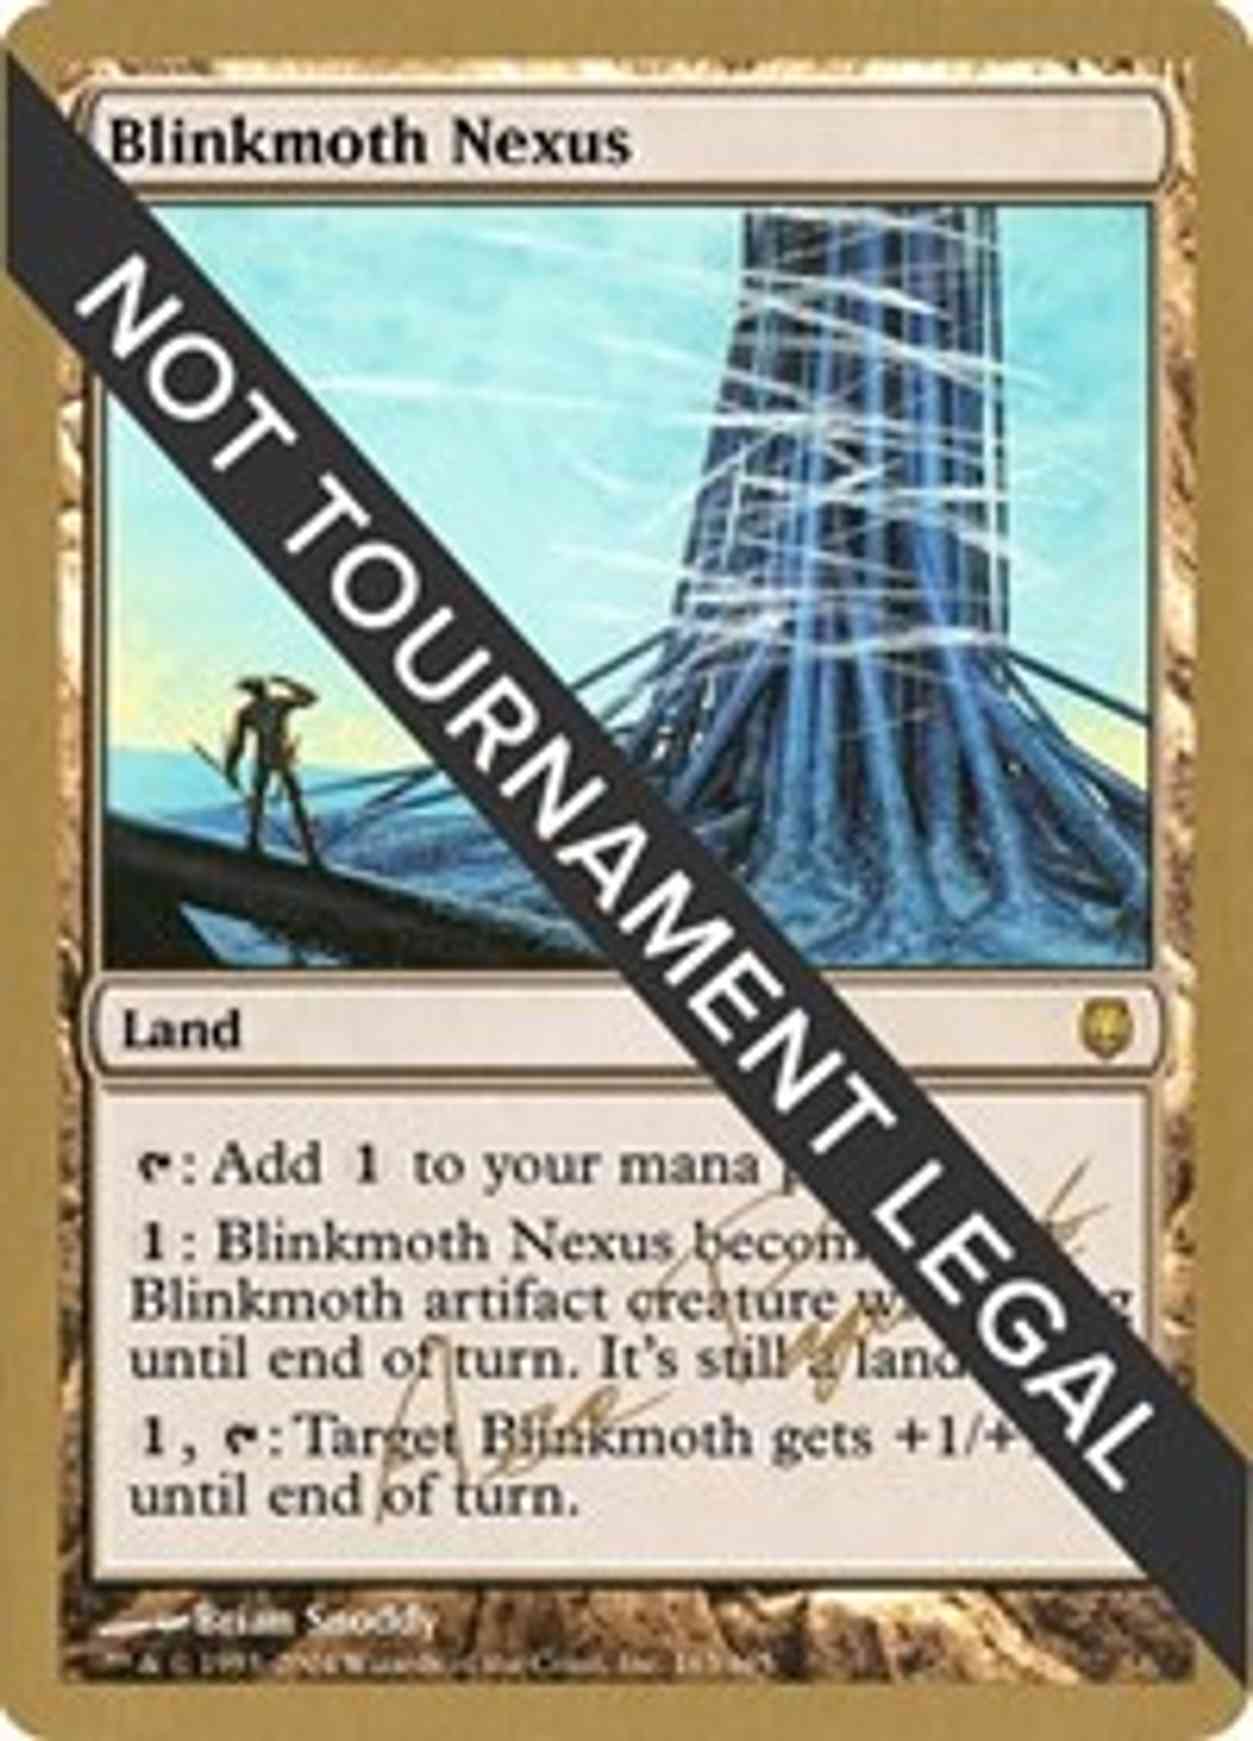 Blinkmoth Nexus - 2004 Aeo Paquette (DST) magic card front